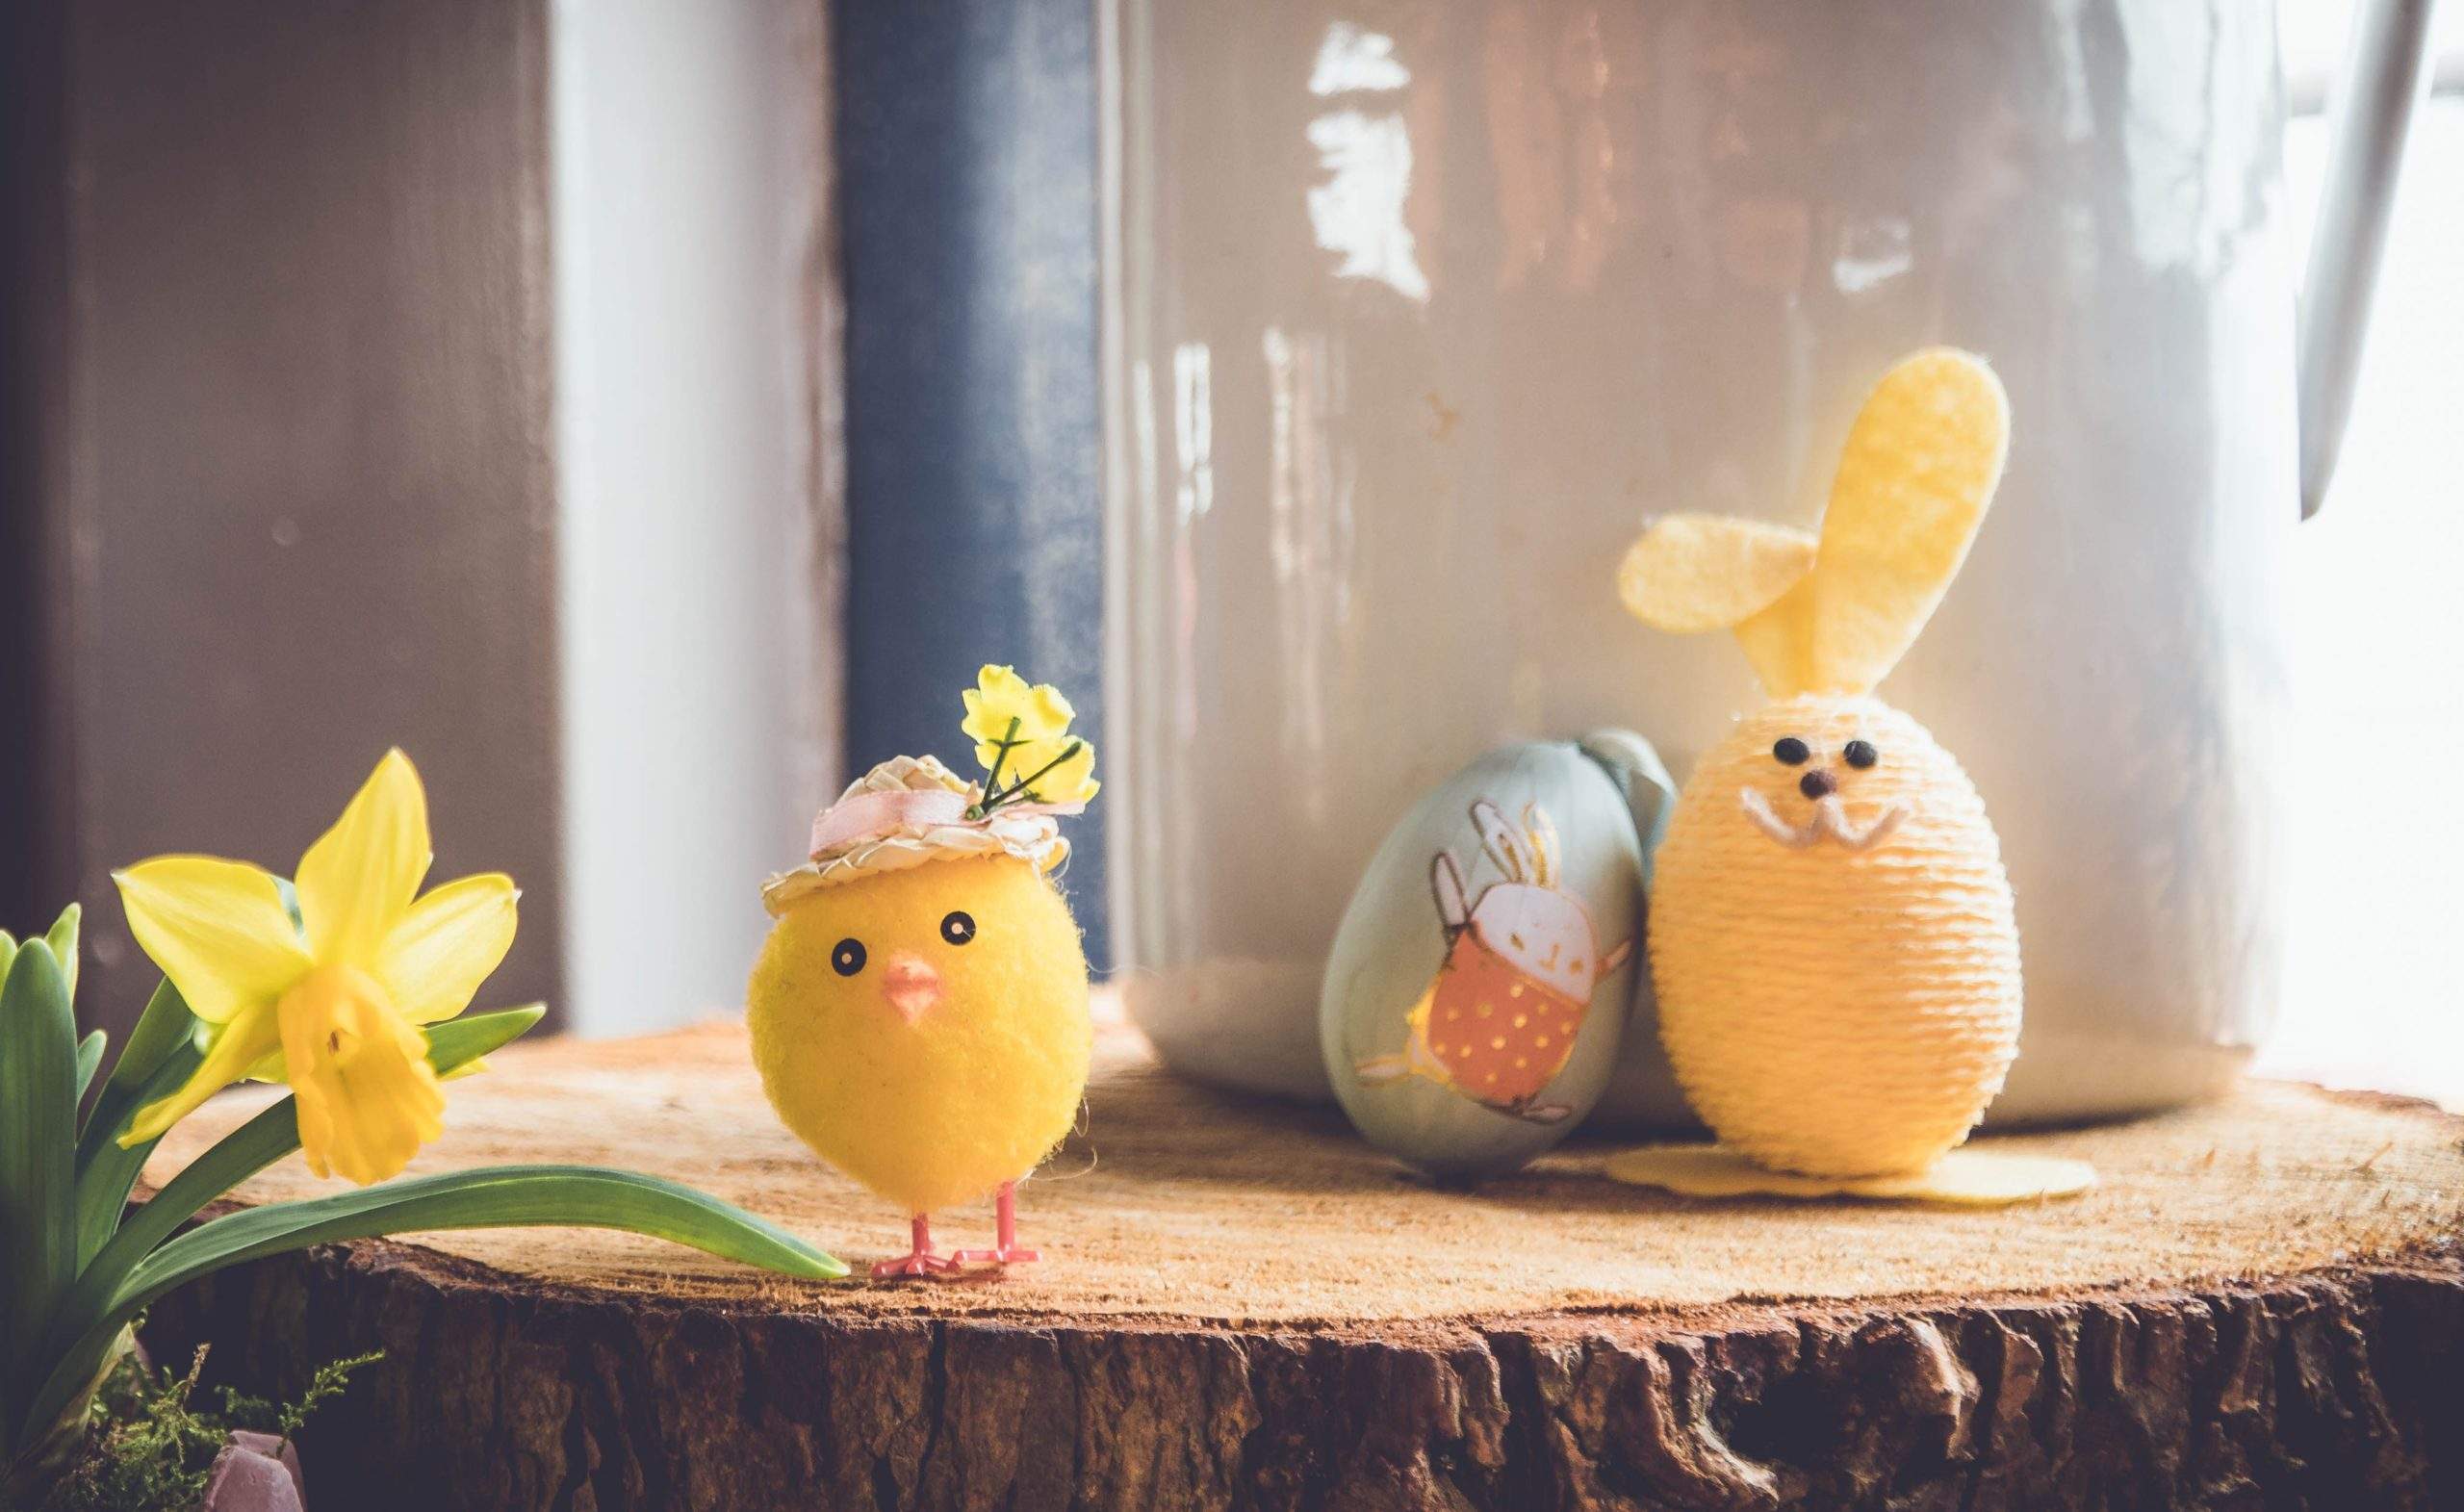 How to celebrate an RV Easter